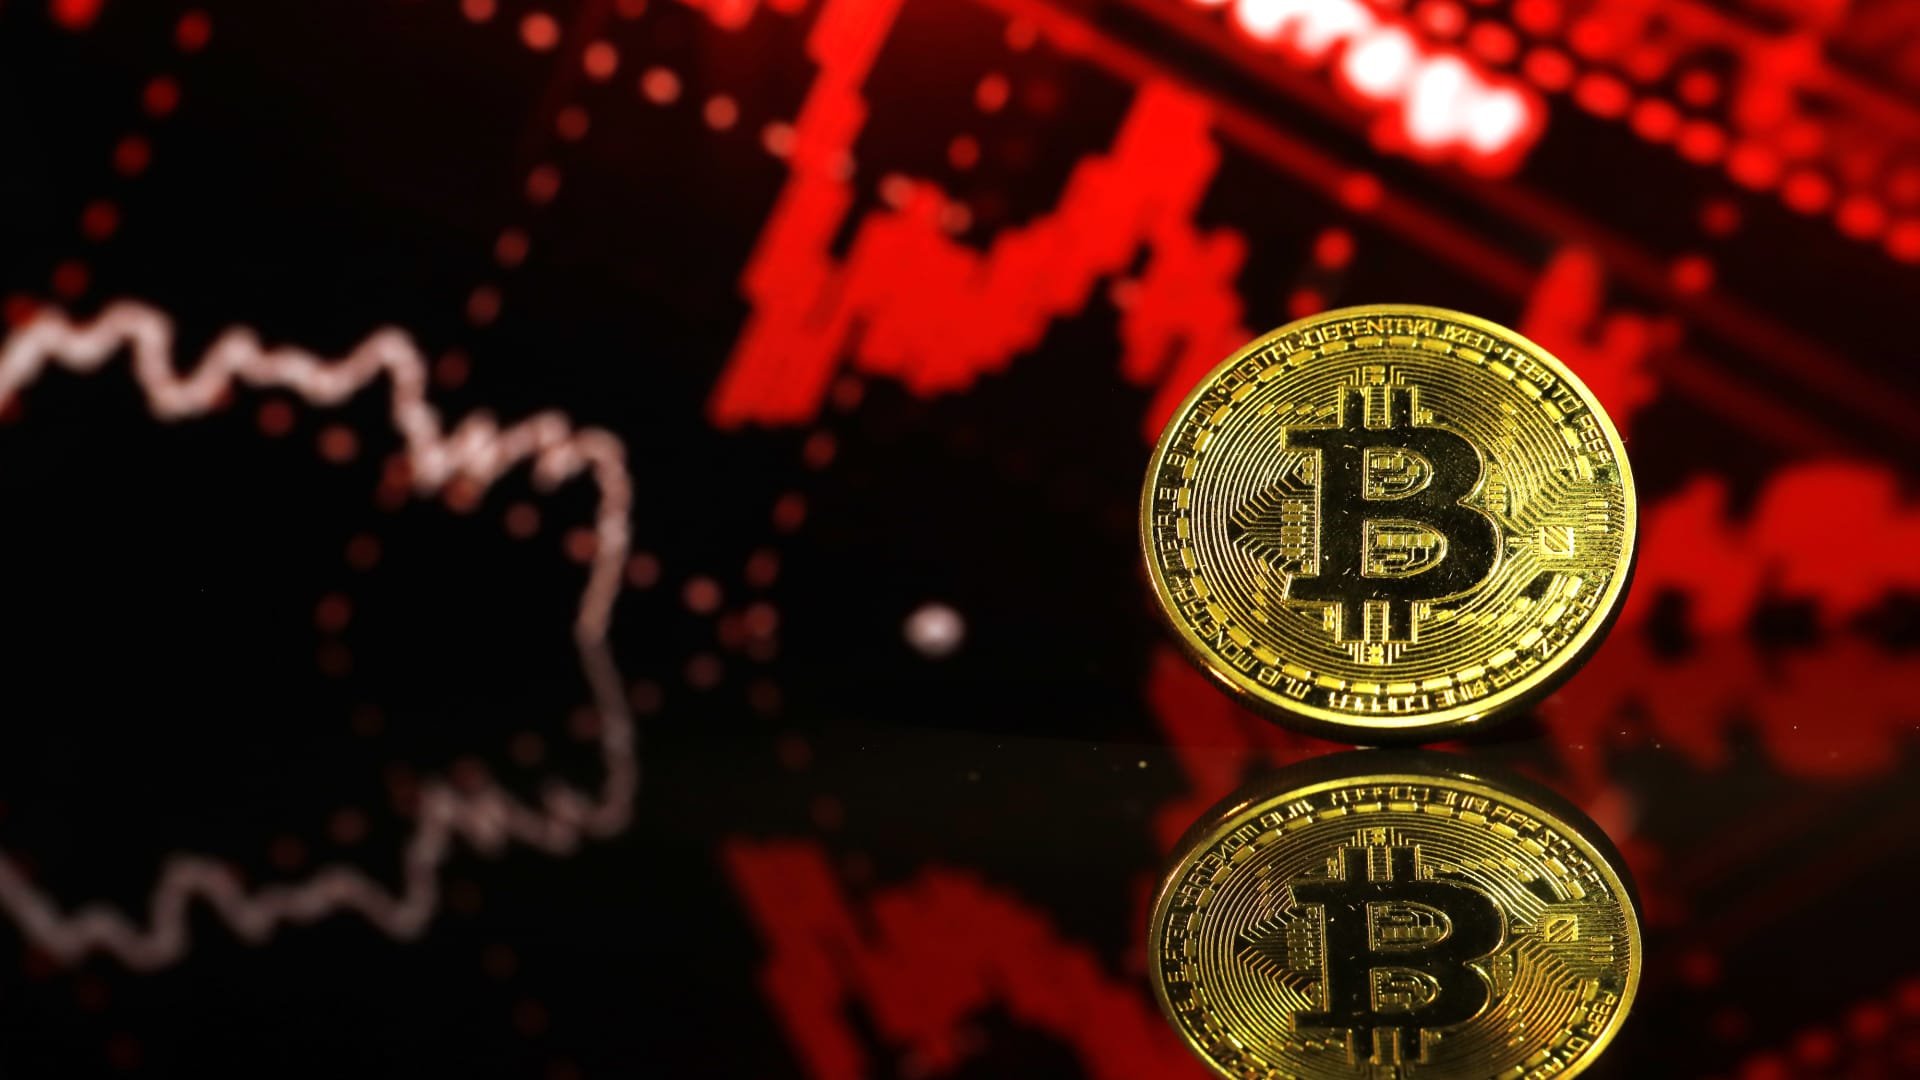 Bitcoin plunges 30% to $30,000 at one point in wild session, recovers somewhat to $38,000